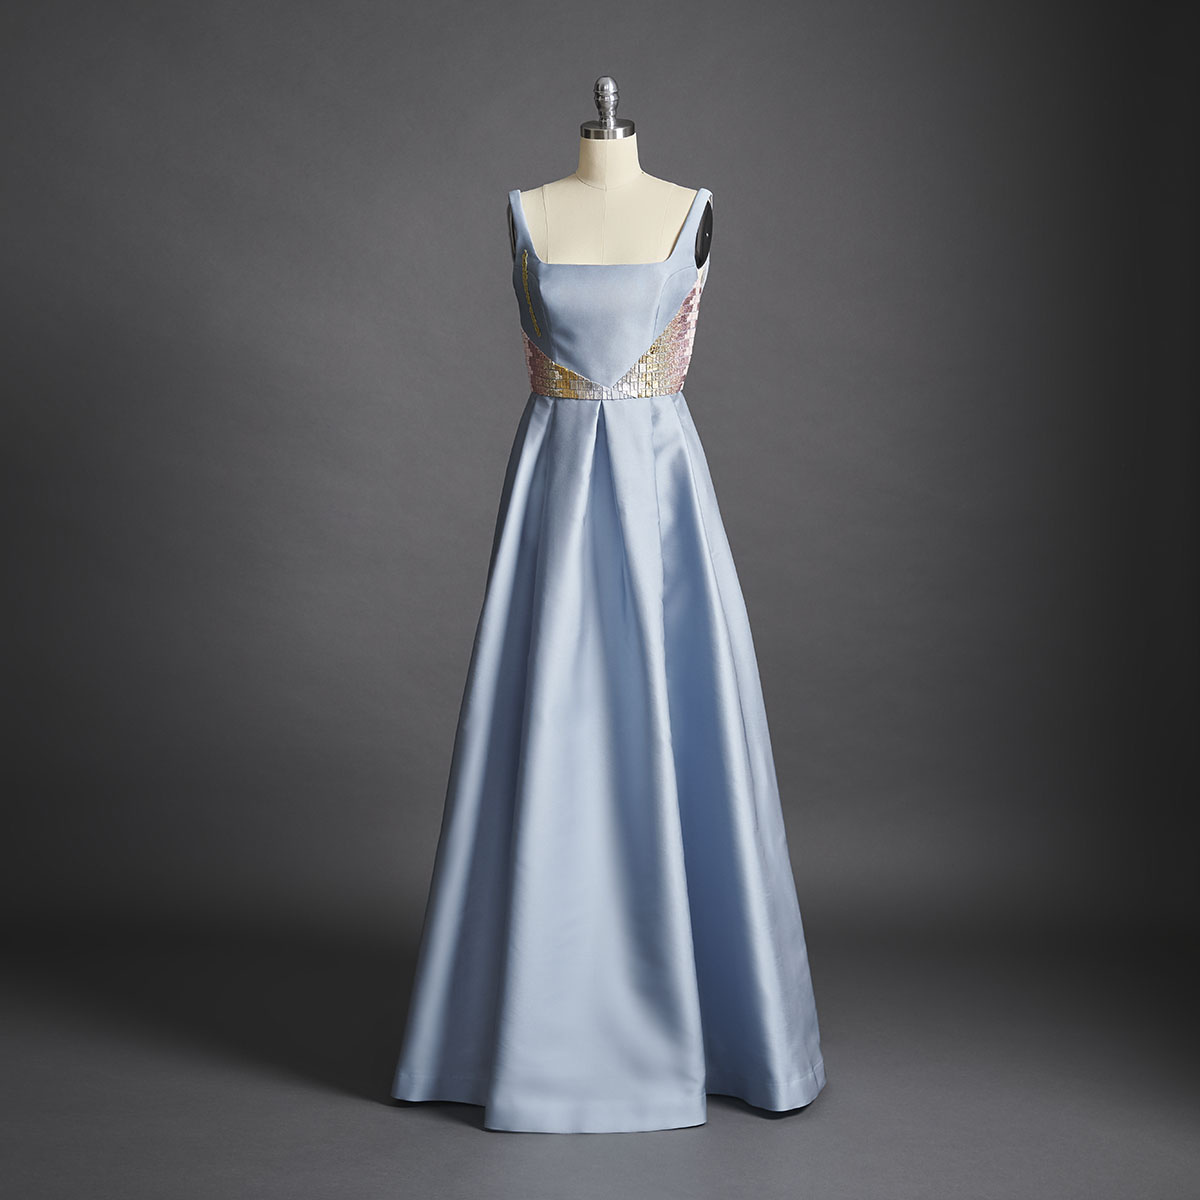 Reminiscent of a shimmering mosaic, this silk pale blue taffeta dress is embellished with hand-cut tesserae and the designer's signature metallic thread. - DELPHINE GENIN